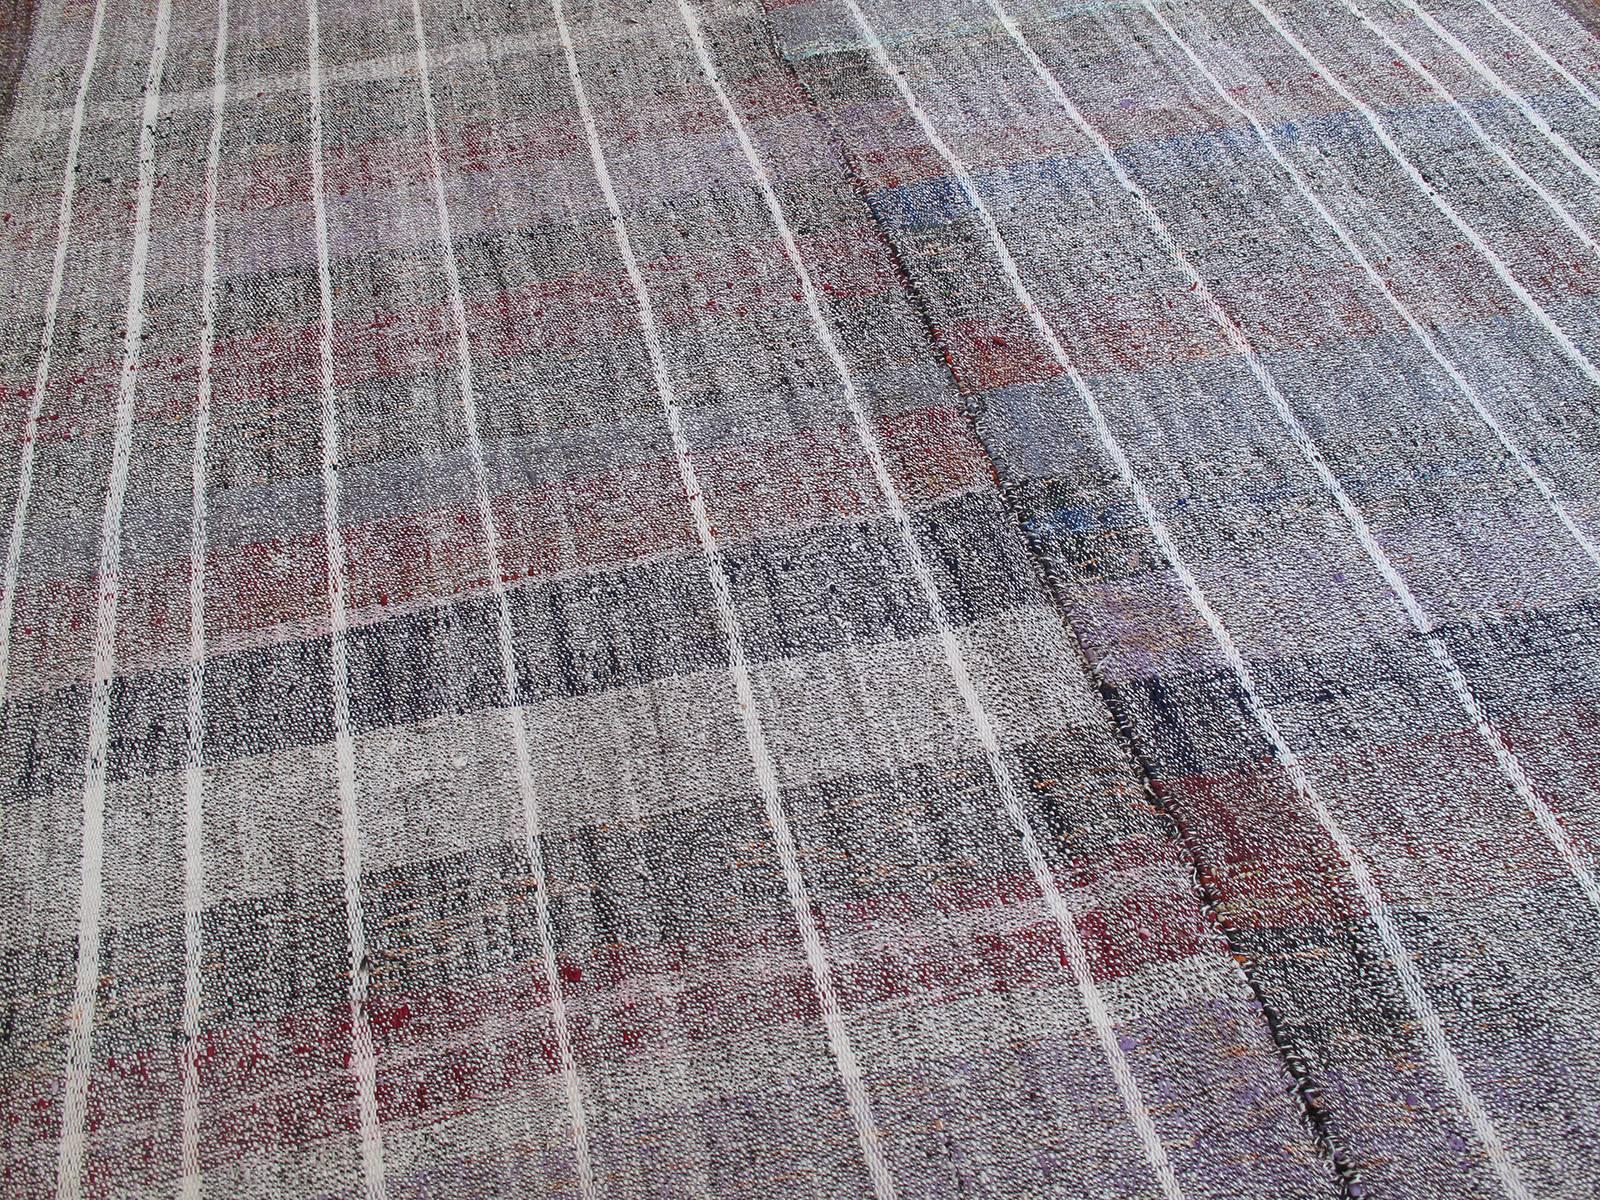 Hand-Woven Cotton and Goat Hair Kilim with Subtle Color